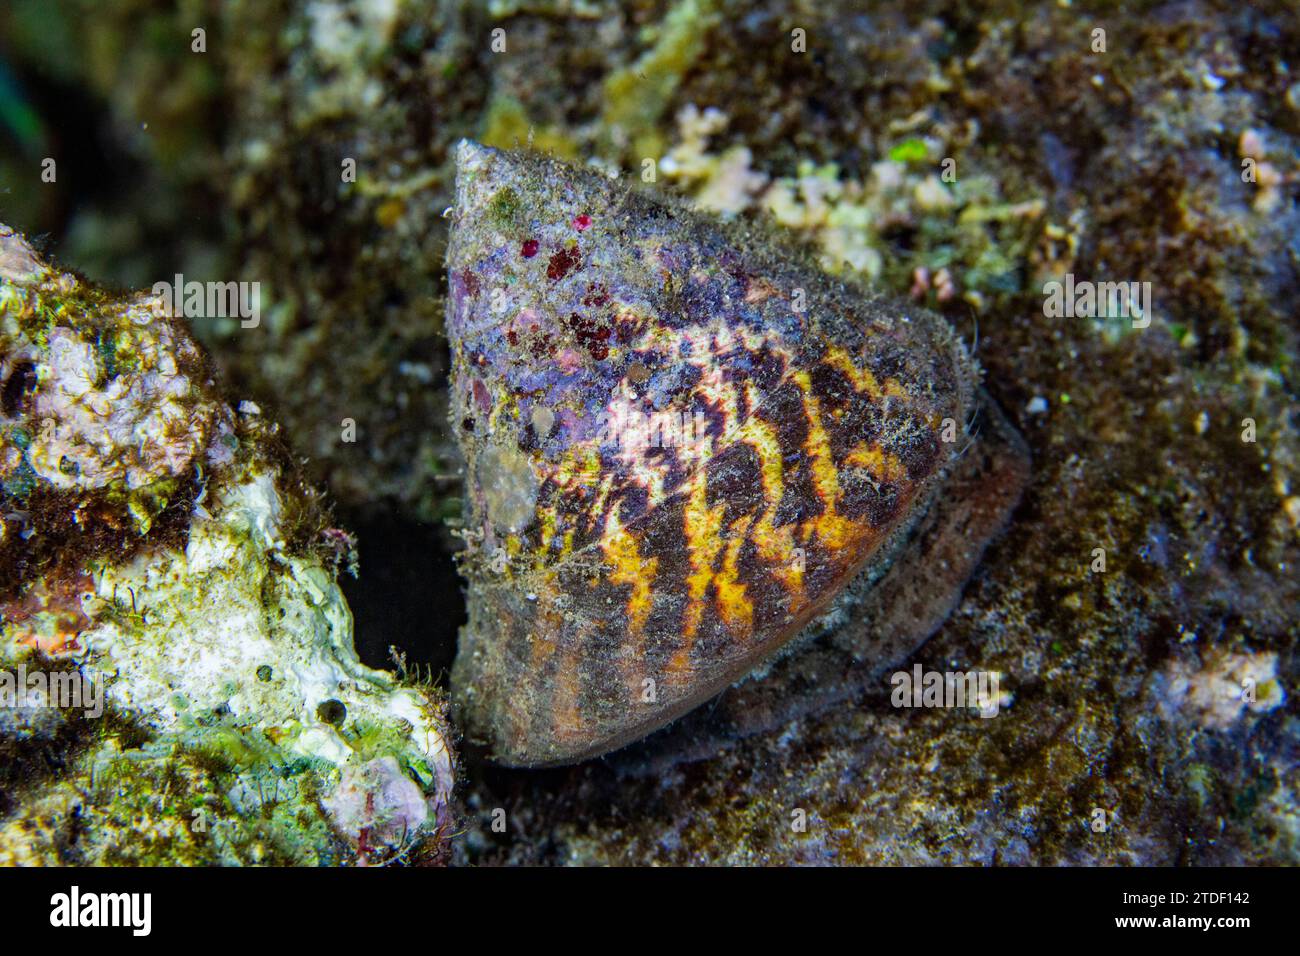 An adult commercial top shell (Rocha nilotica), on a night snorkel at Arborek Reef, Raja Ampat, Indonesia, Southeast Asia, Asia Stock Photo